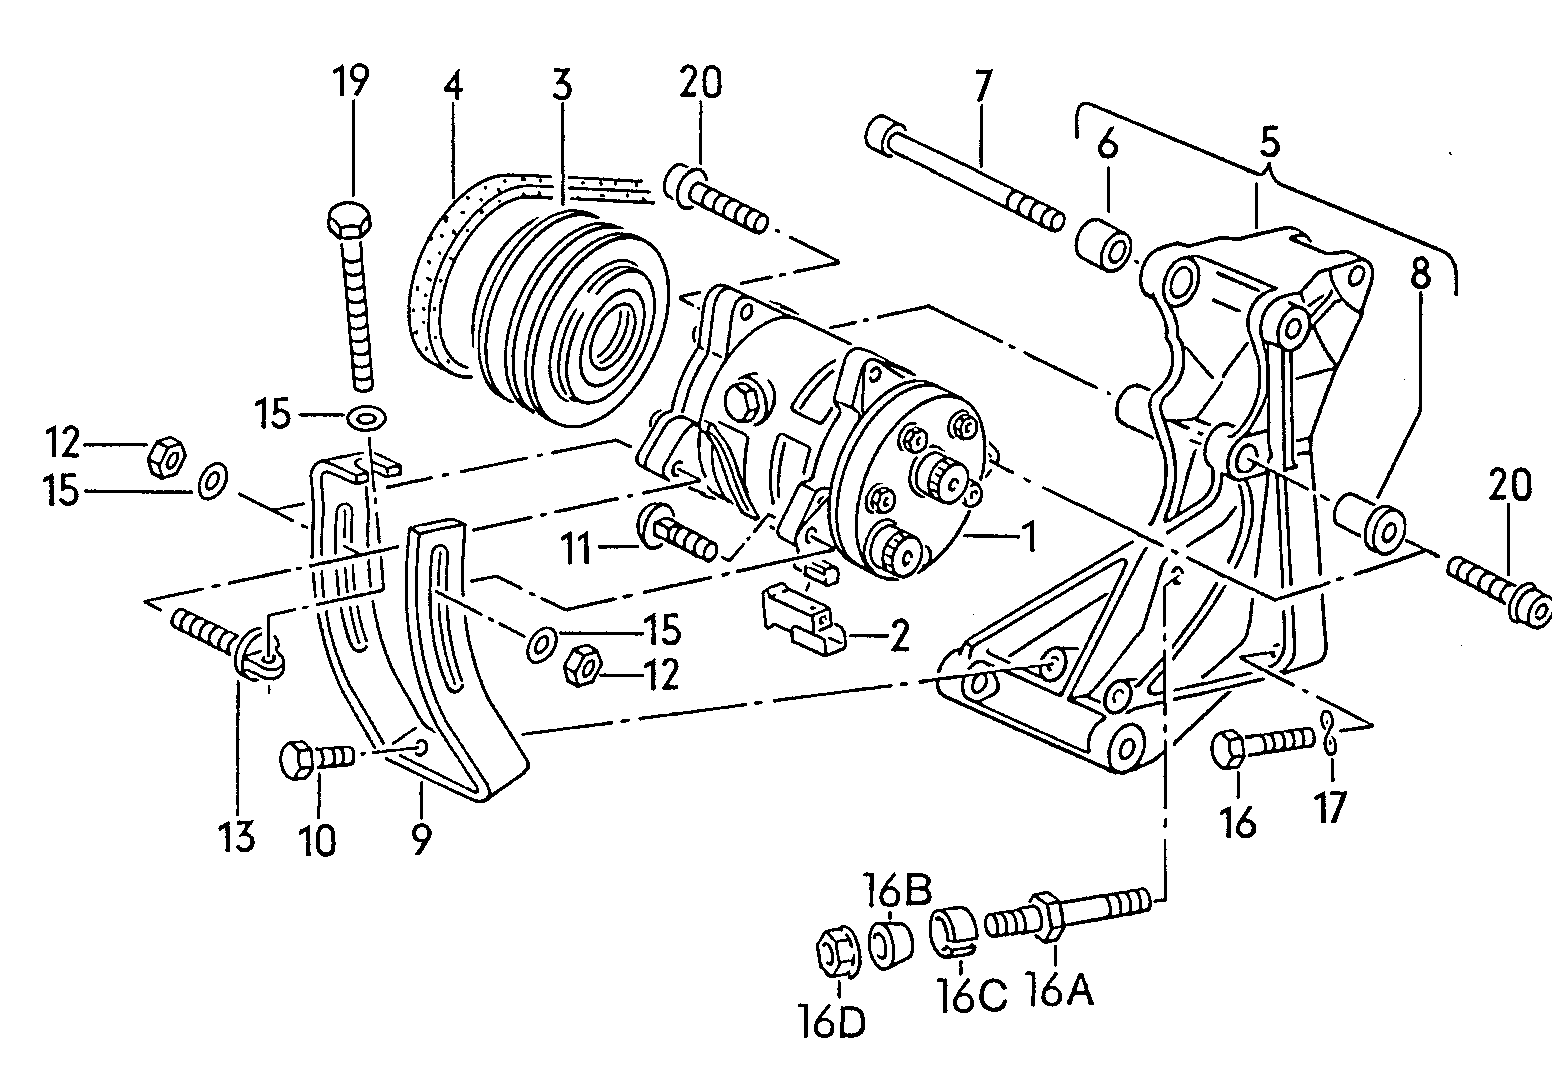 A/C compressorconnecting and mounting parts<br>for compressor 1.8ltr. - Corrado - cor